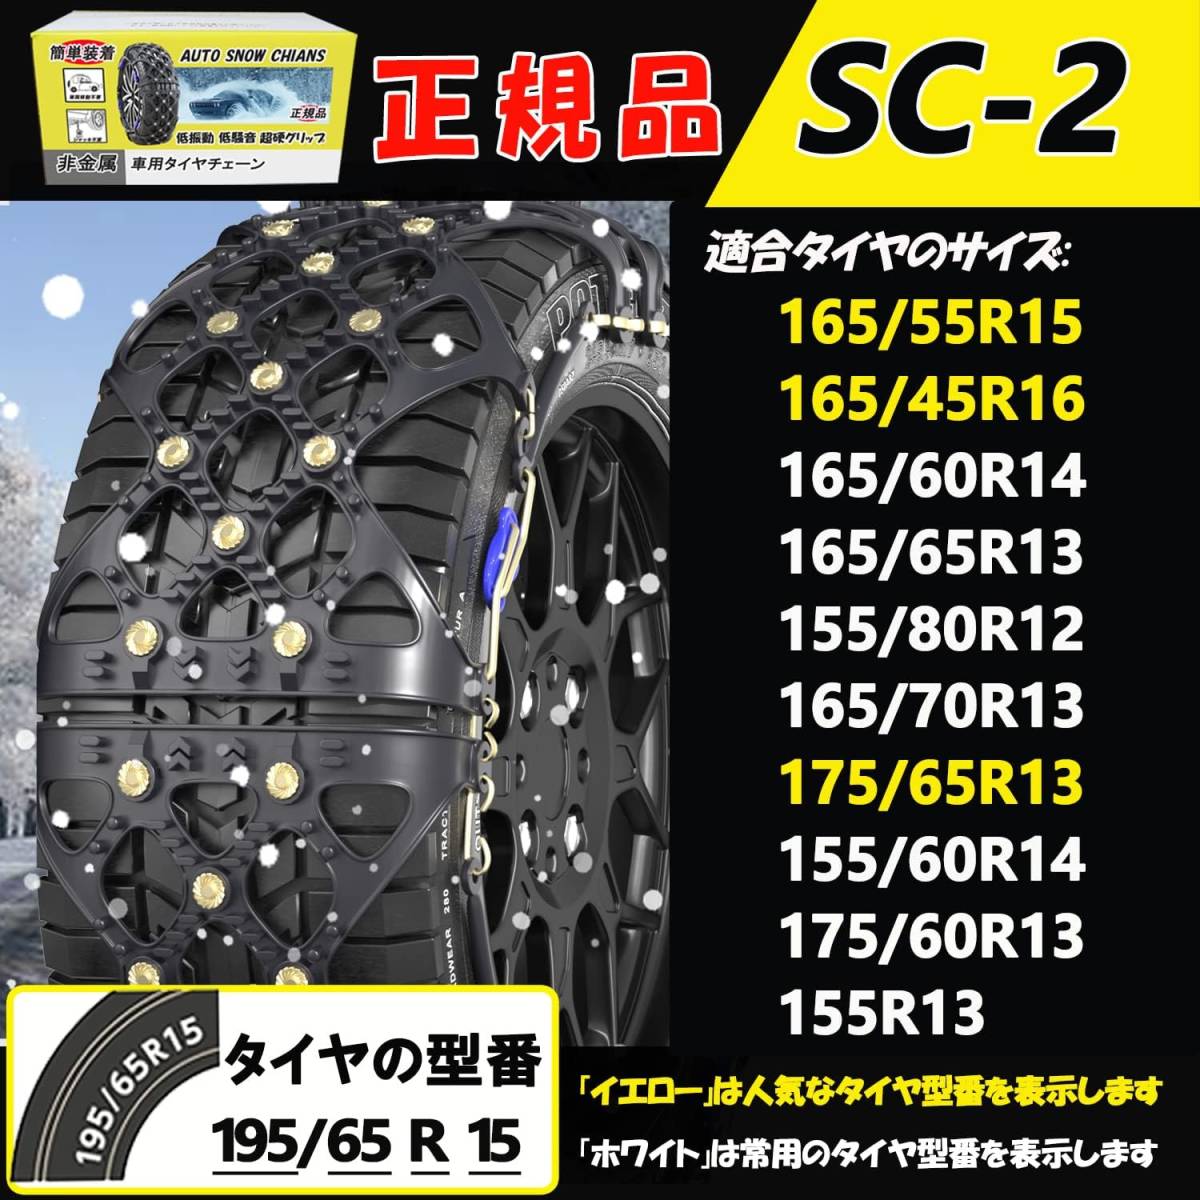 HAIKAWI non metal tire chain [ restriction goods ] car snow chain light car snow chain easy installation jack up un- necessary winter emergency snow and ice control SC2